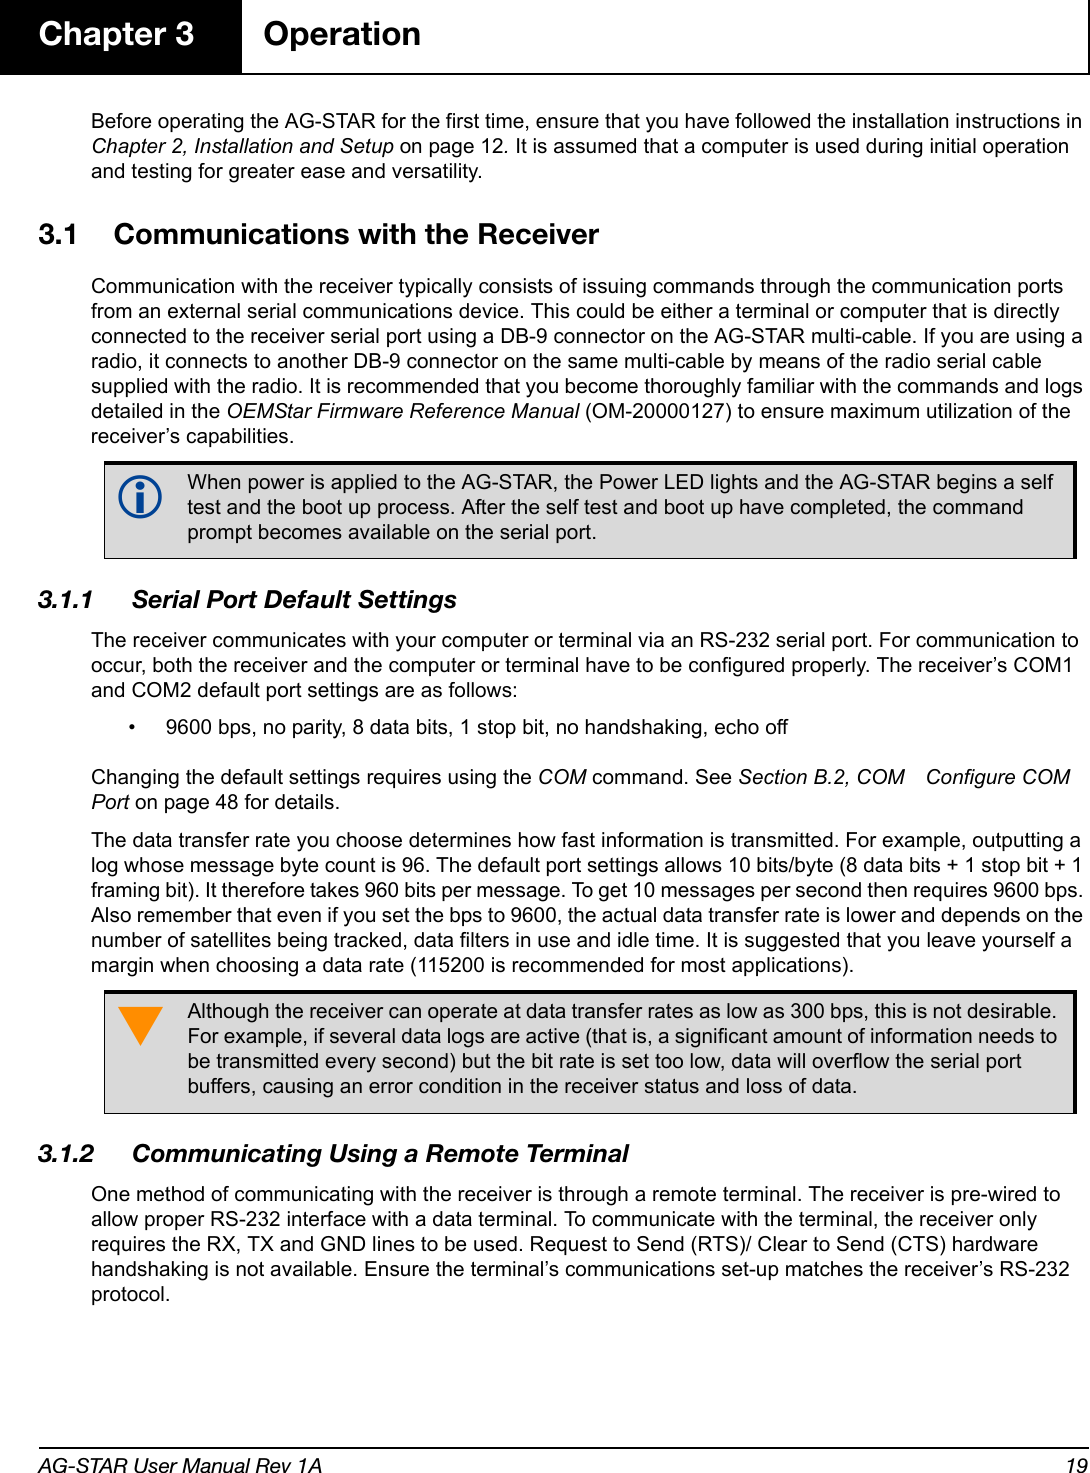 AG-STAR User Manual Rev 1A 19Chapter 3 OperationBefore operating the AG-STAR for the first time, ensure that you have followed the installation instructions in Chapter 2, Installation and Setup on page 12. It is assumed that a computer is used during initial operation and testing for greater ease and versatility.3.1 Communications with the ReceiverCommunication with the receiver typically consists of issuing commands through the communication ports from an external serial communications device. This could be either a terminal or computer that is directly connected to the receiver serial port using a DB-9 connector on the AG-STAR multi-cable. If you are using a radio, it connects to another DB-9 connector on the same multi-cable by means of the radio serial cable supplied with the radio. It is recommended that you become thoroughly familiar with the commands and logs detailed in the OEMStar Firmware Reference Manual (OM-20000127) to ensure maximum utilization of the receiver’s capabilities.3.1.1 Serial Port Default SettingsThe receiver communicates with your computer or terminal via an RS-232 serial port. For communication to occur, both the receiver and the computer or terminal have to be configured properly. The receiver’s COM1 and COM2 default port settings are as follows:• 9600 bps, no parity, 8 data bits, 1 stop bit, no handshaking, echo offChanging the default settings requires using the COM command. See Section B.2, COM Configure COM Port on page 48 for details.The data transfer rate you choose determines how fast information is transmitted. For example, outputting a log whose message byte count is 96. The default port settings allows 10 bits/byte (8 data bits + 1 stop bit + 1 framing bit). It therefore takes 960 bits per message. To get 10 messages per second then requires 9600 bps. Also remember that even if you set the bps to 9600, the actual data transfer rate is lower and depends on the number of satellites being tracked, data filters in use and idle time. It is suggested that you leave yourself a margin when choosing a data rate (115200 is recommended for most applications).3.1.2 Communicating Using a Remote TerminalOne method of communicating with the receiver is through a remote terminal. The receiver is pre-wired to allow proper RS-232 interface with a data terminal. To communicate with the terminal, the receiver only requires the RX, TX and GND lines to be used. Request to Send (RTS)/ Clear to Send (CTS) hardware handshaking is not available. Ensure the terminal’s communications set-up matches the receiver’s RS-232 protocol.When power is applied to the AG-STAR, the Power LED lights and the AG-STAR begins a self test and the boot up process. After the self test and boot up have completed, the command prompt becomes available on the serial port.Although the receiver can operate at data transfer rates as low as 300 bps, this is not desirable. For example, if several data logs are active (that is, a significant amount of information needs to be transmitted every second) but the bit rate is set too low, data will overflow the serial port buffers, causing an error condition in the receiver status and loss of data.